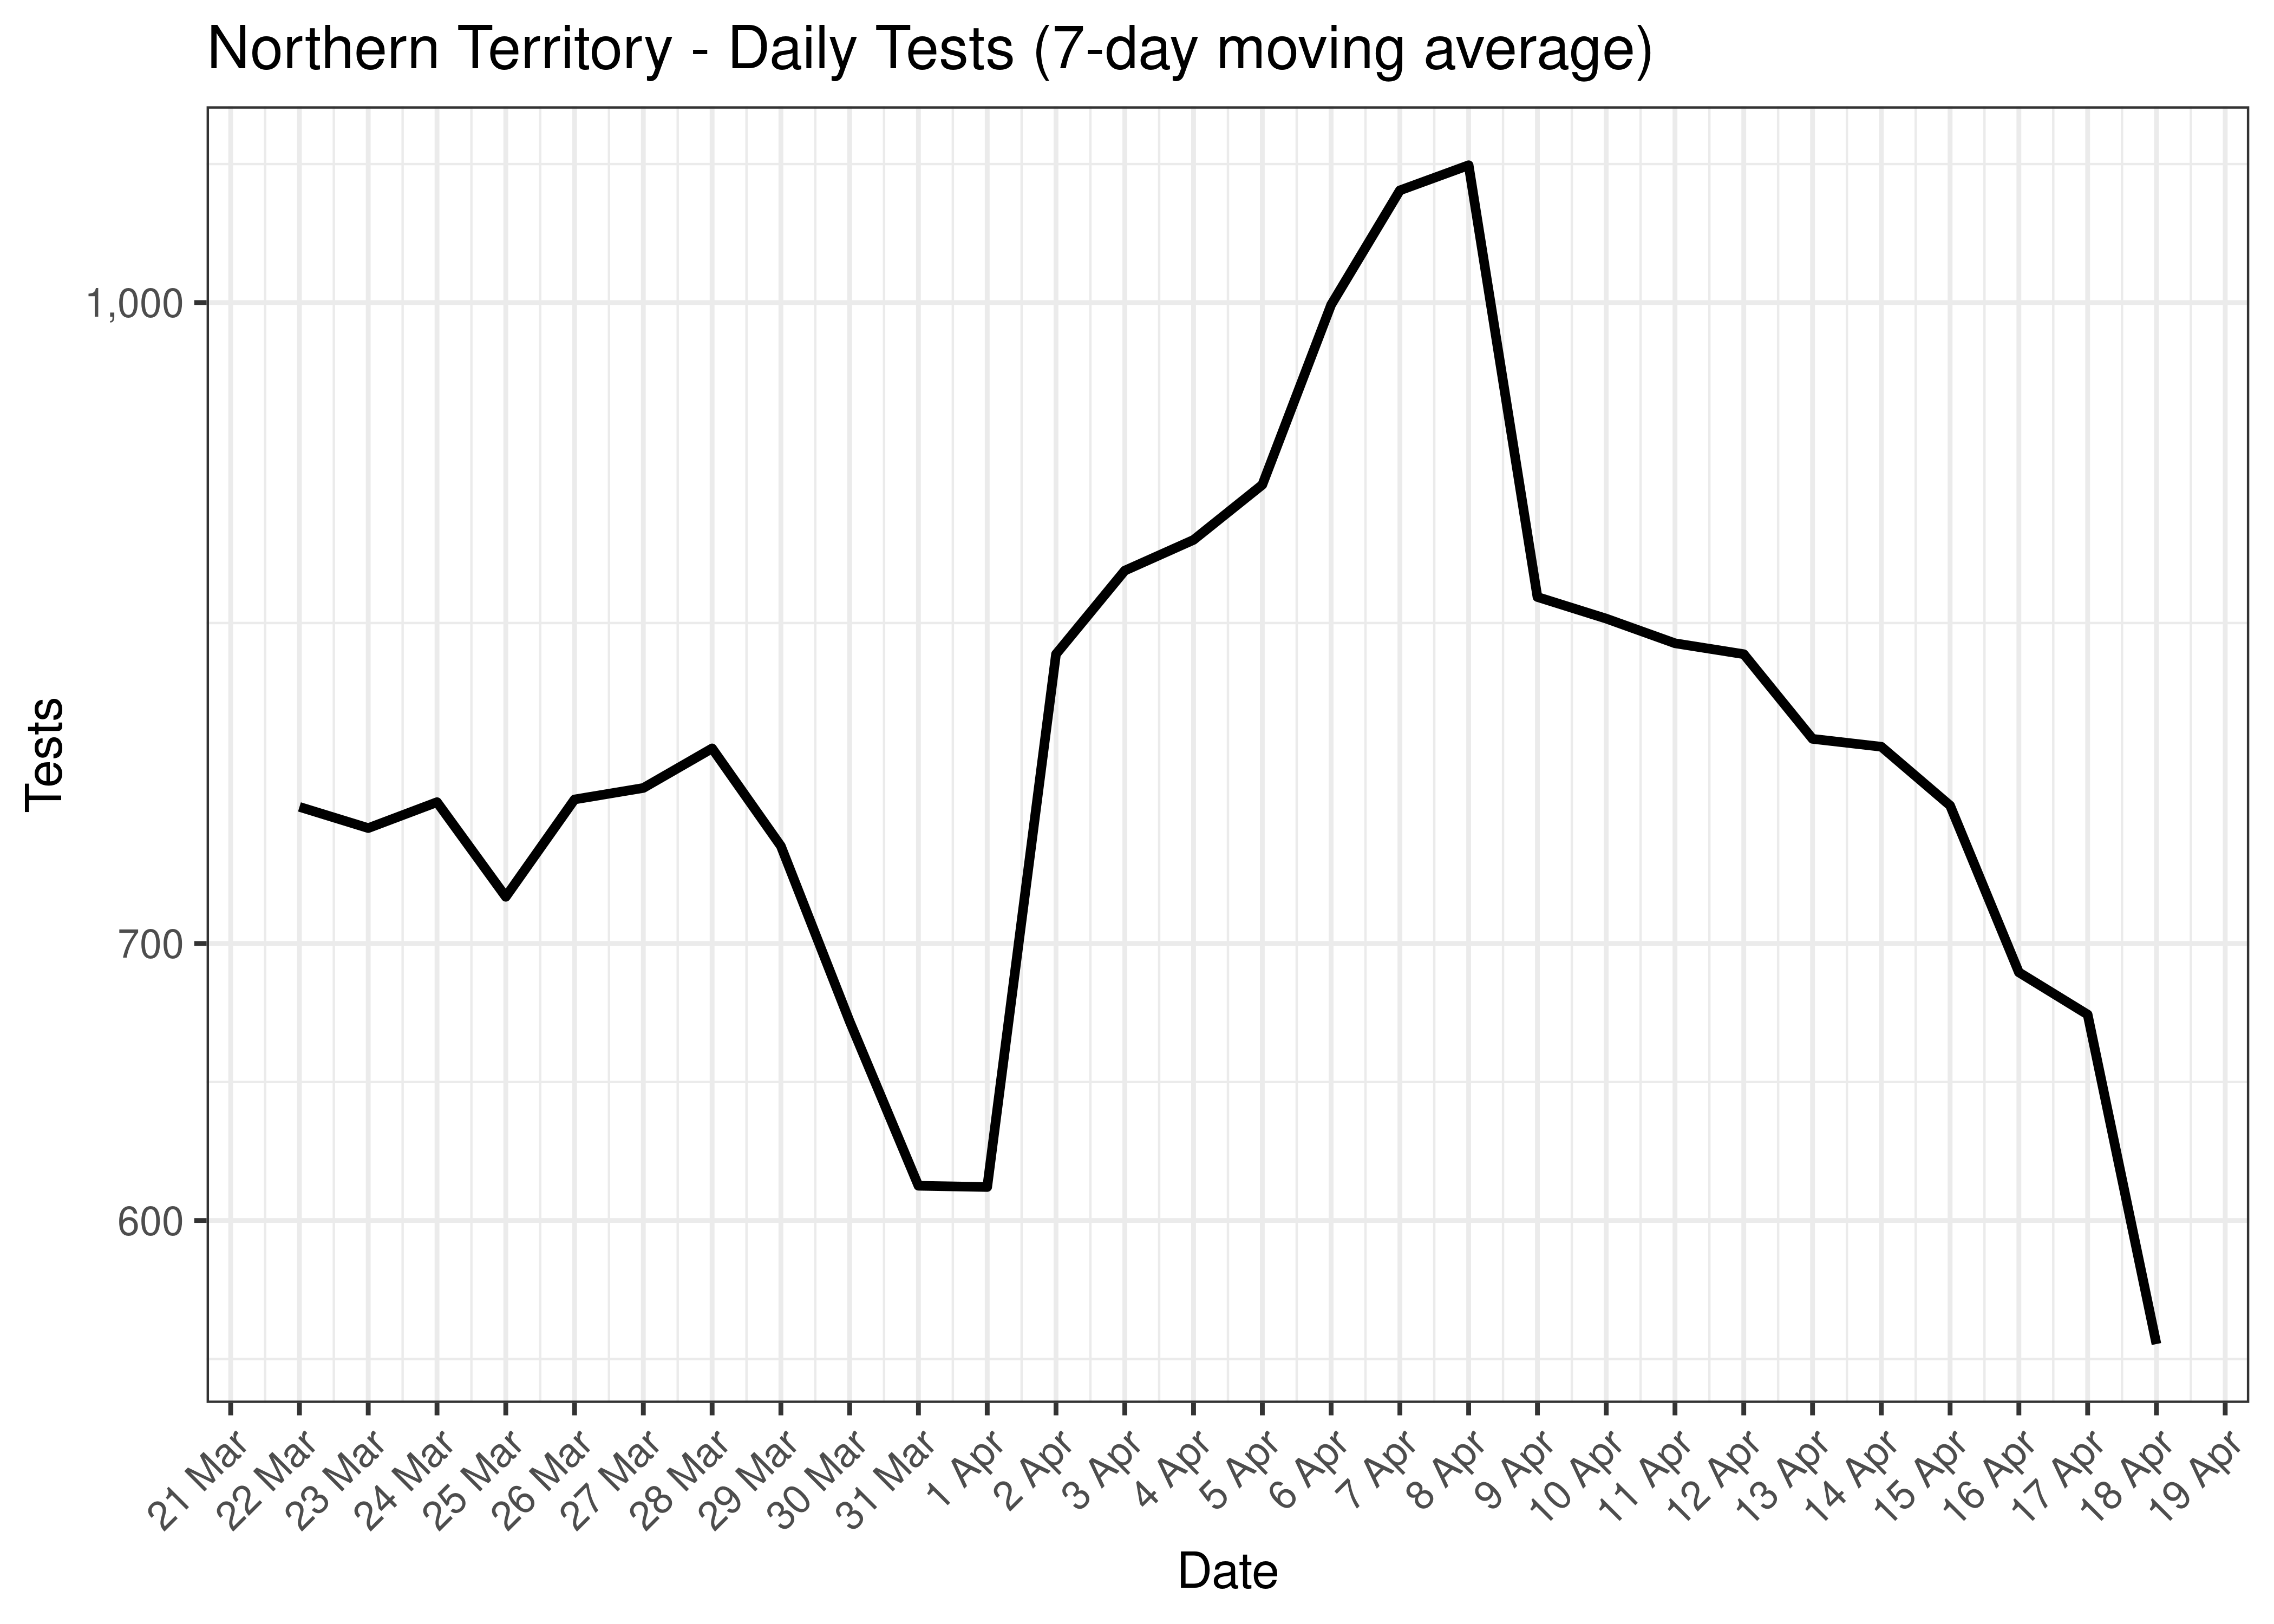 Northern Territory - Daily Tests for Last 30 Days (7-day moving average)